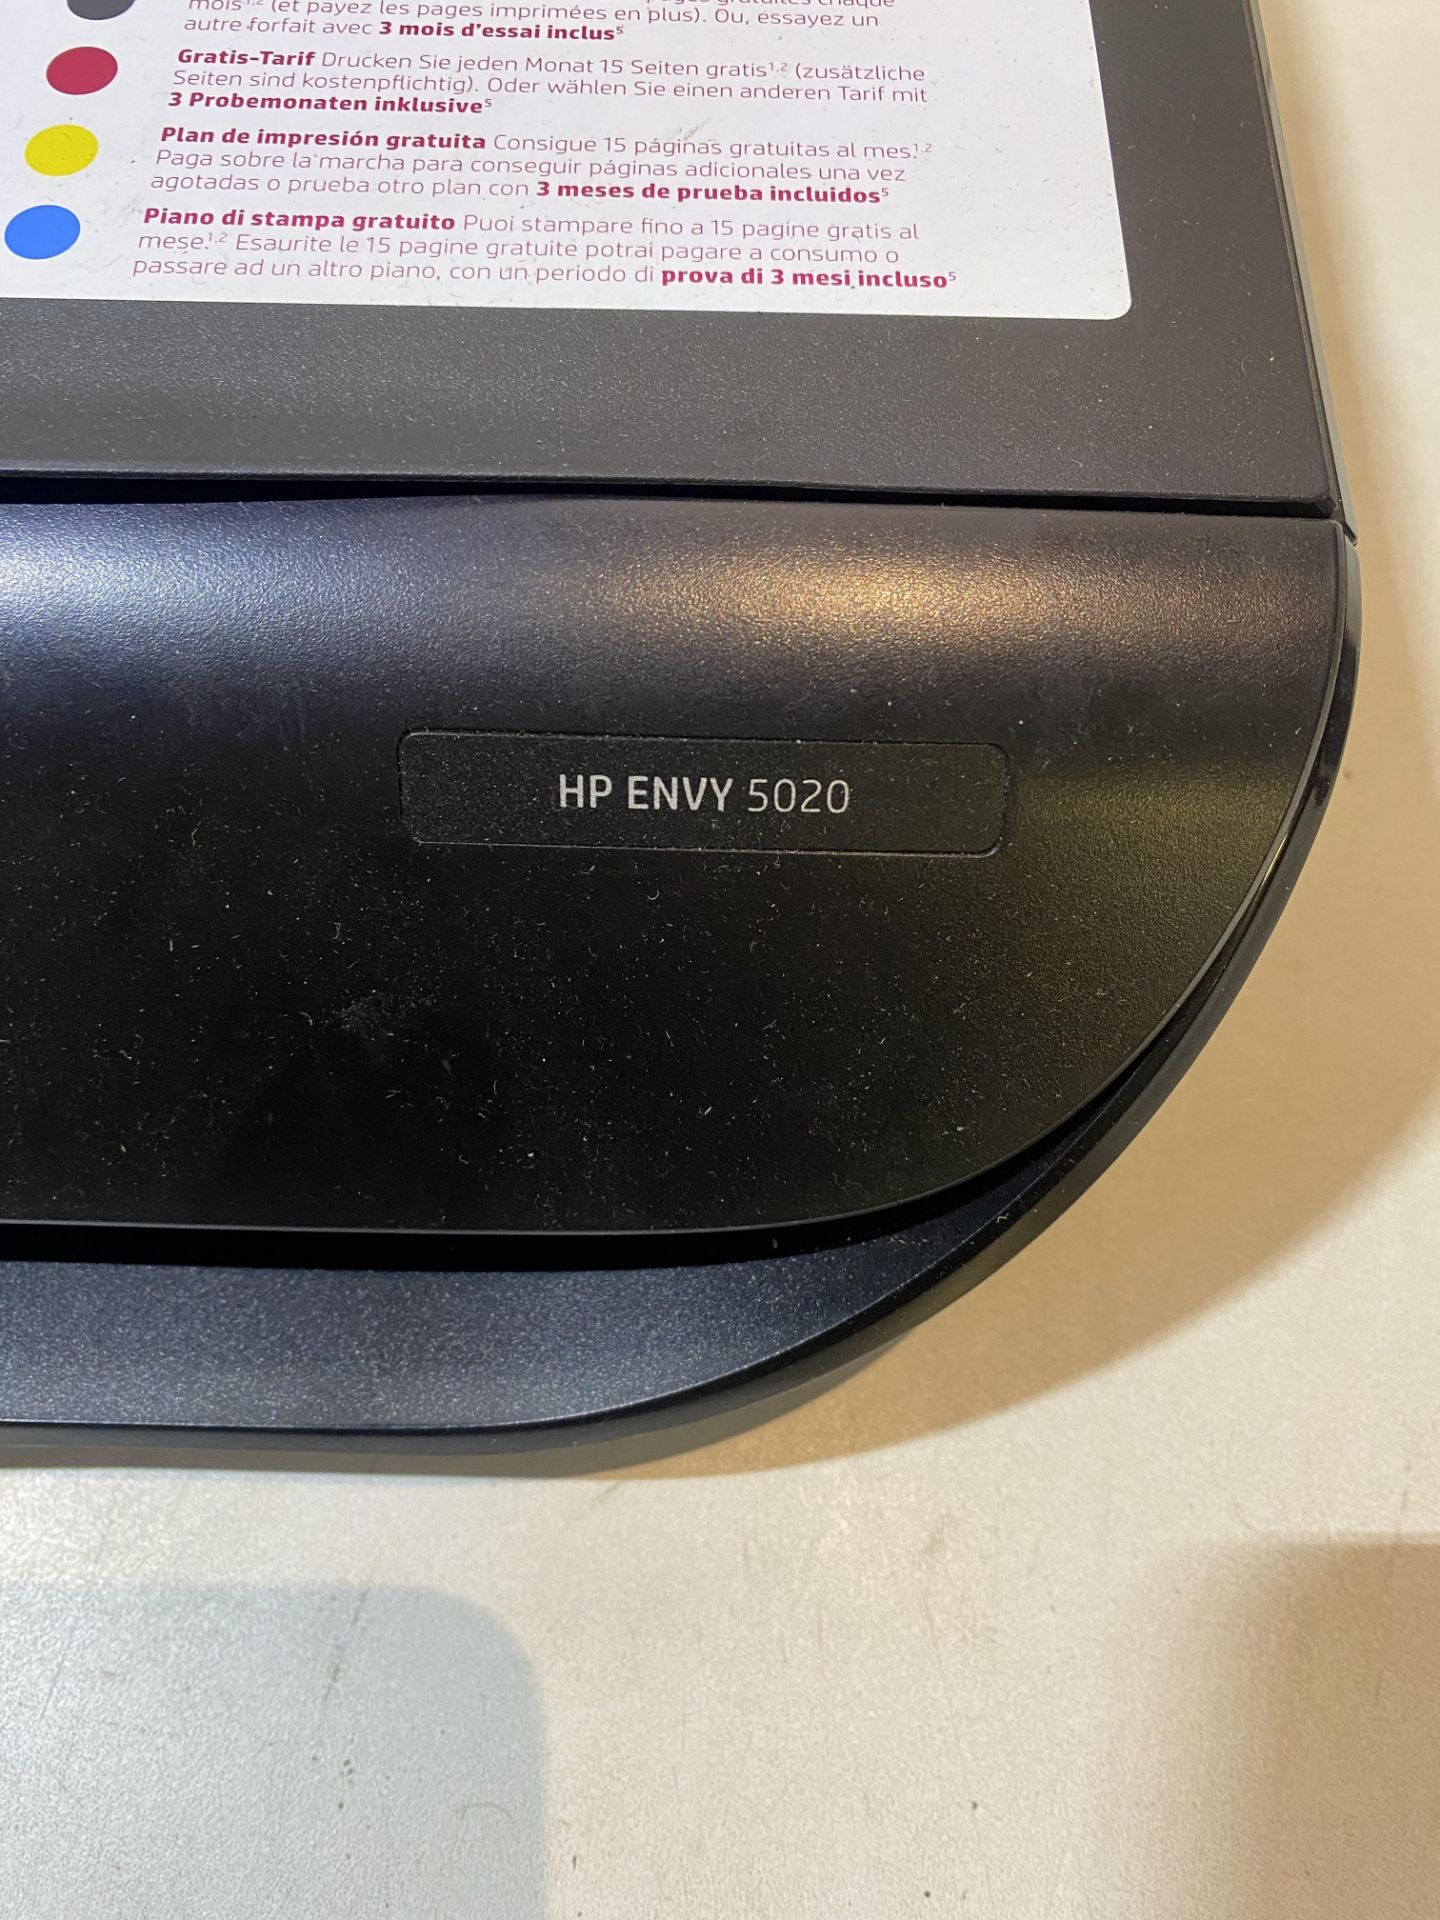 HP ENVY 5020 All-in-One Printer - Image 3 of 9